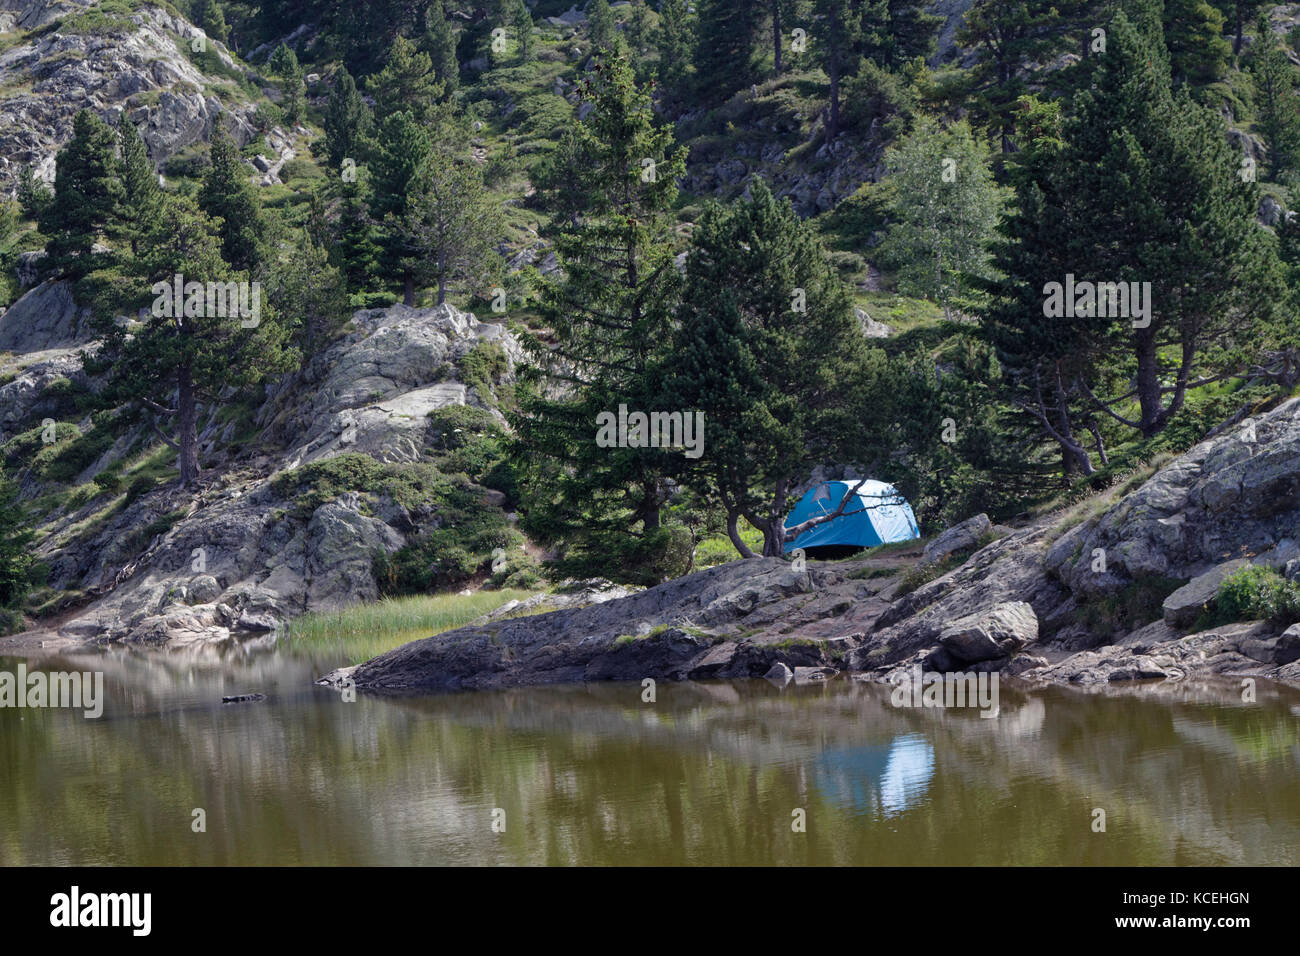 CHAMROUSSE, FRANCE, July 29, 2017 : Camping on the banks of the Lac Achard in the mountain resort of Chamrousse. Stock Photo